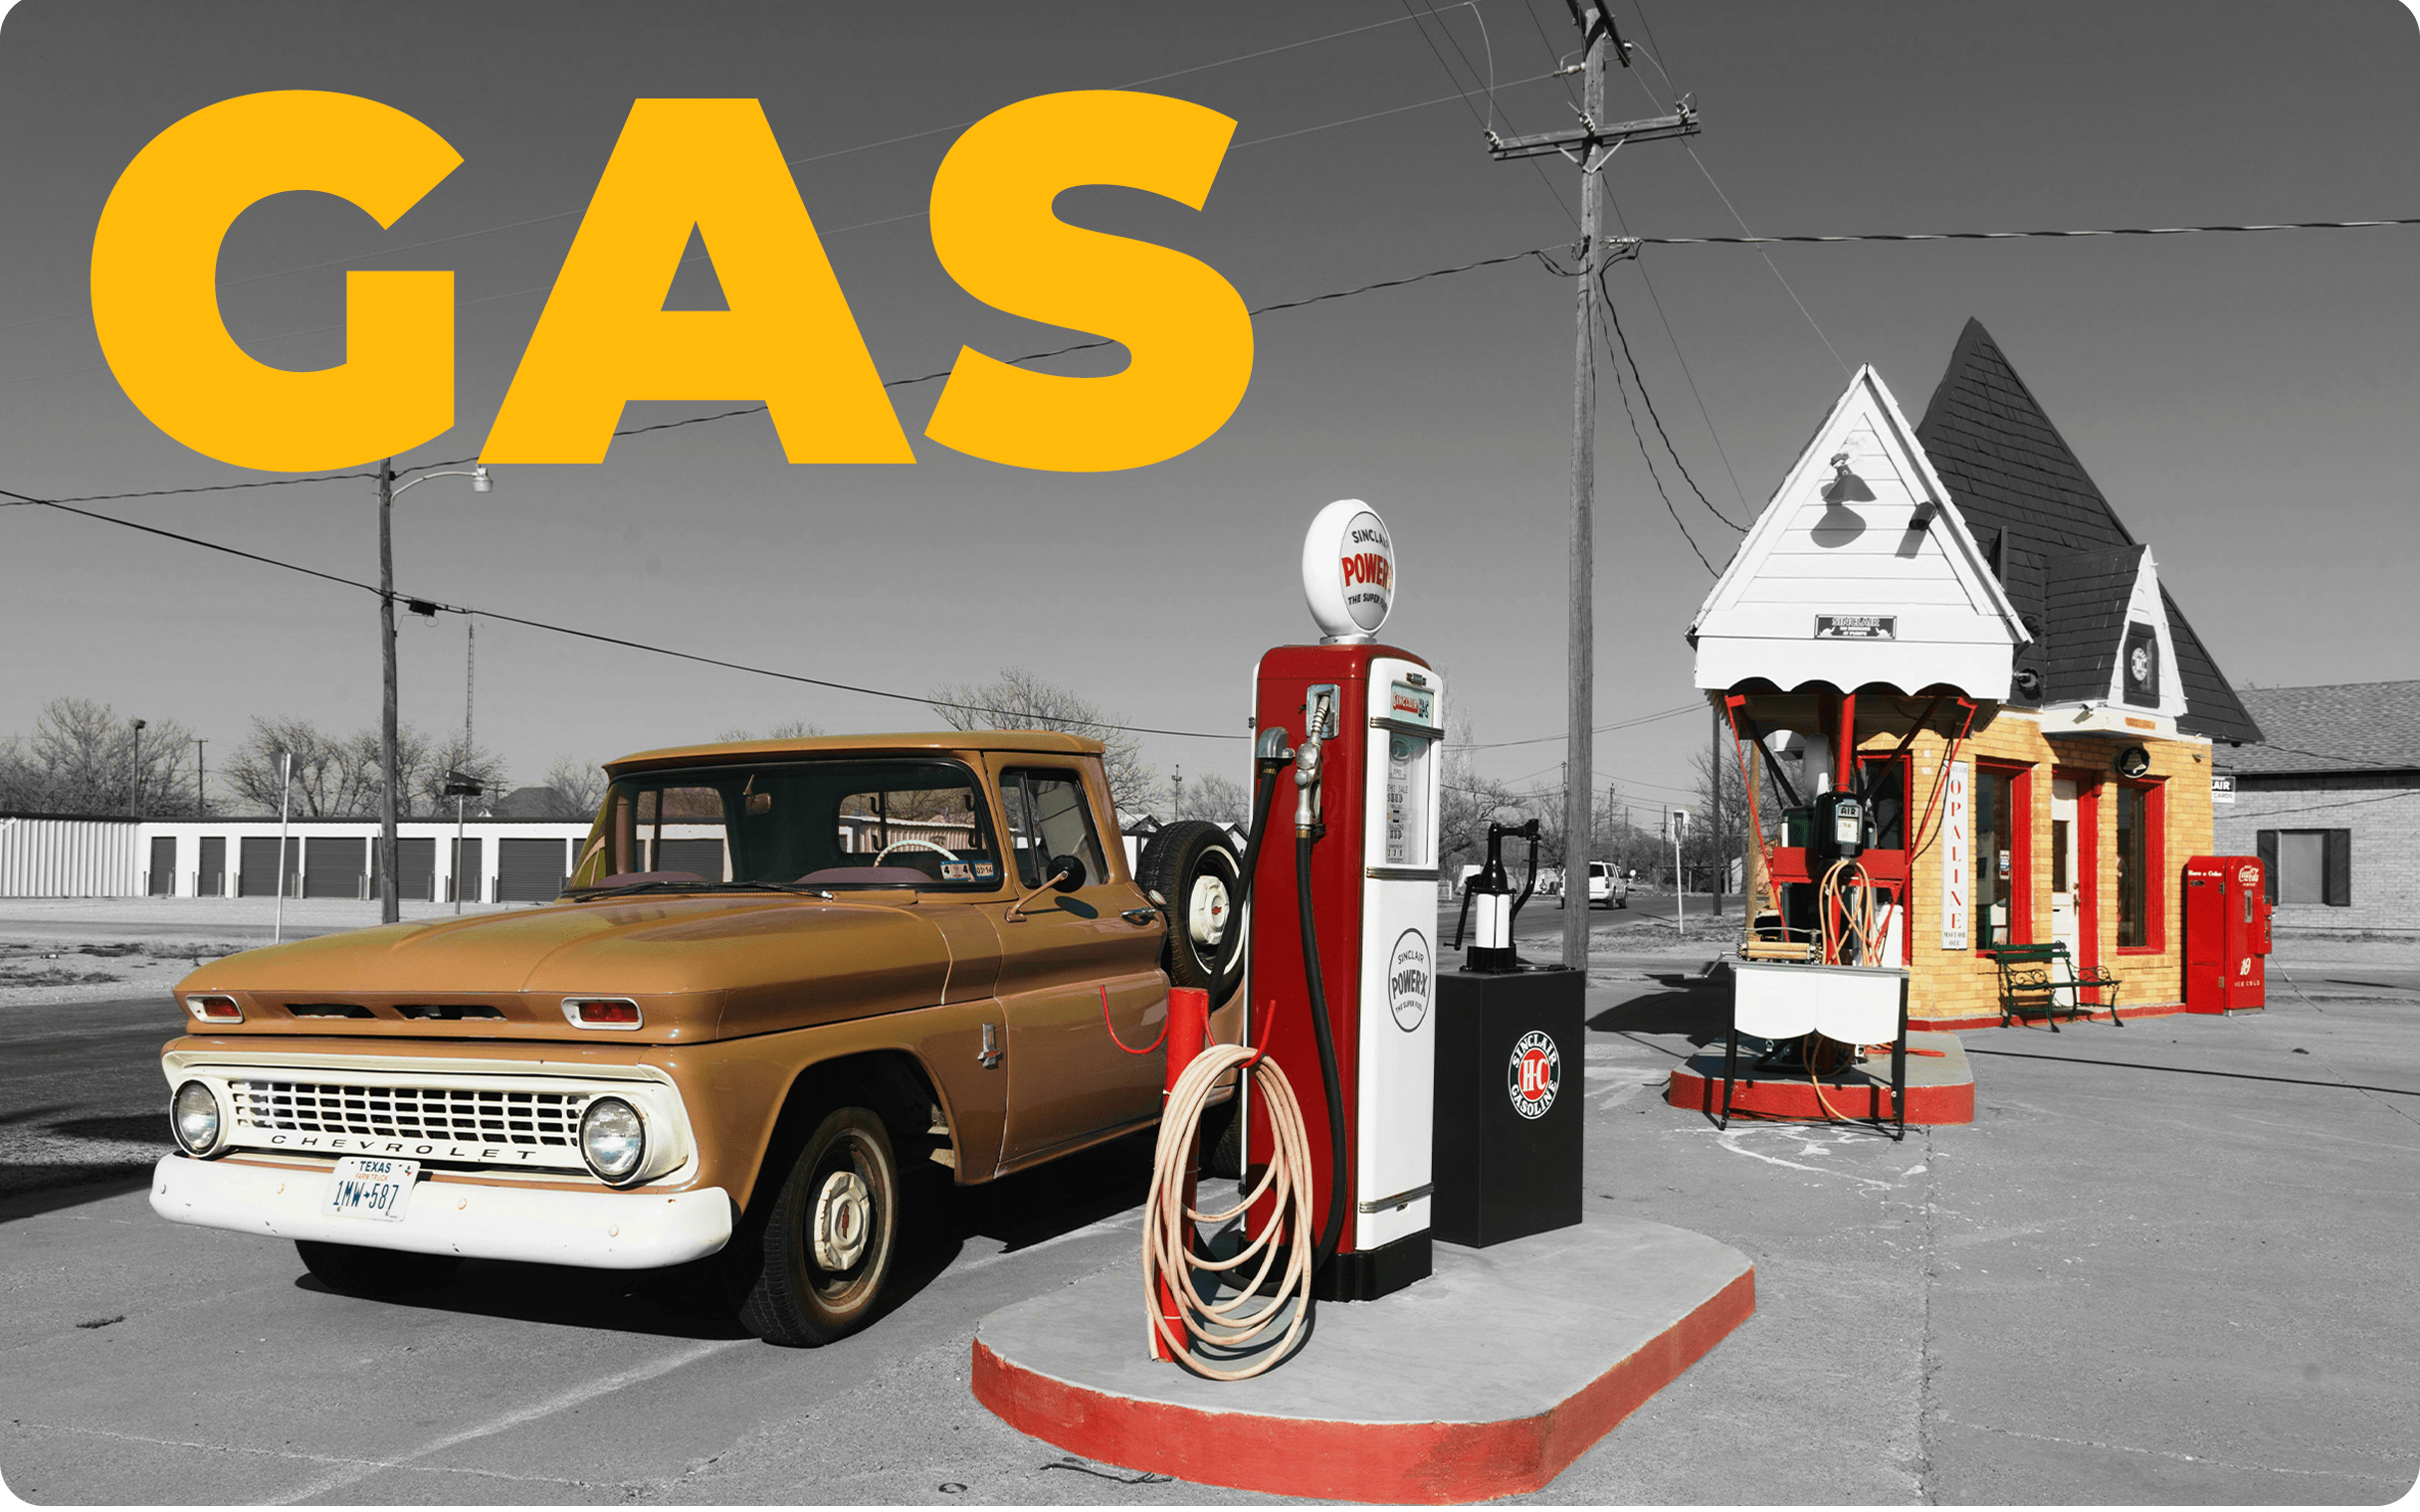 How to talk about gas stations in English